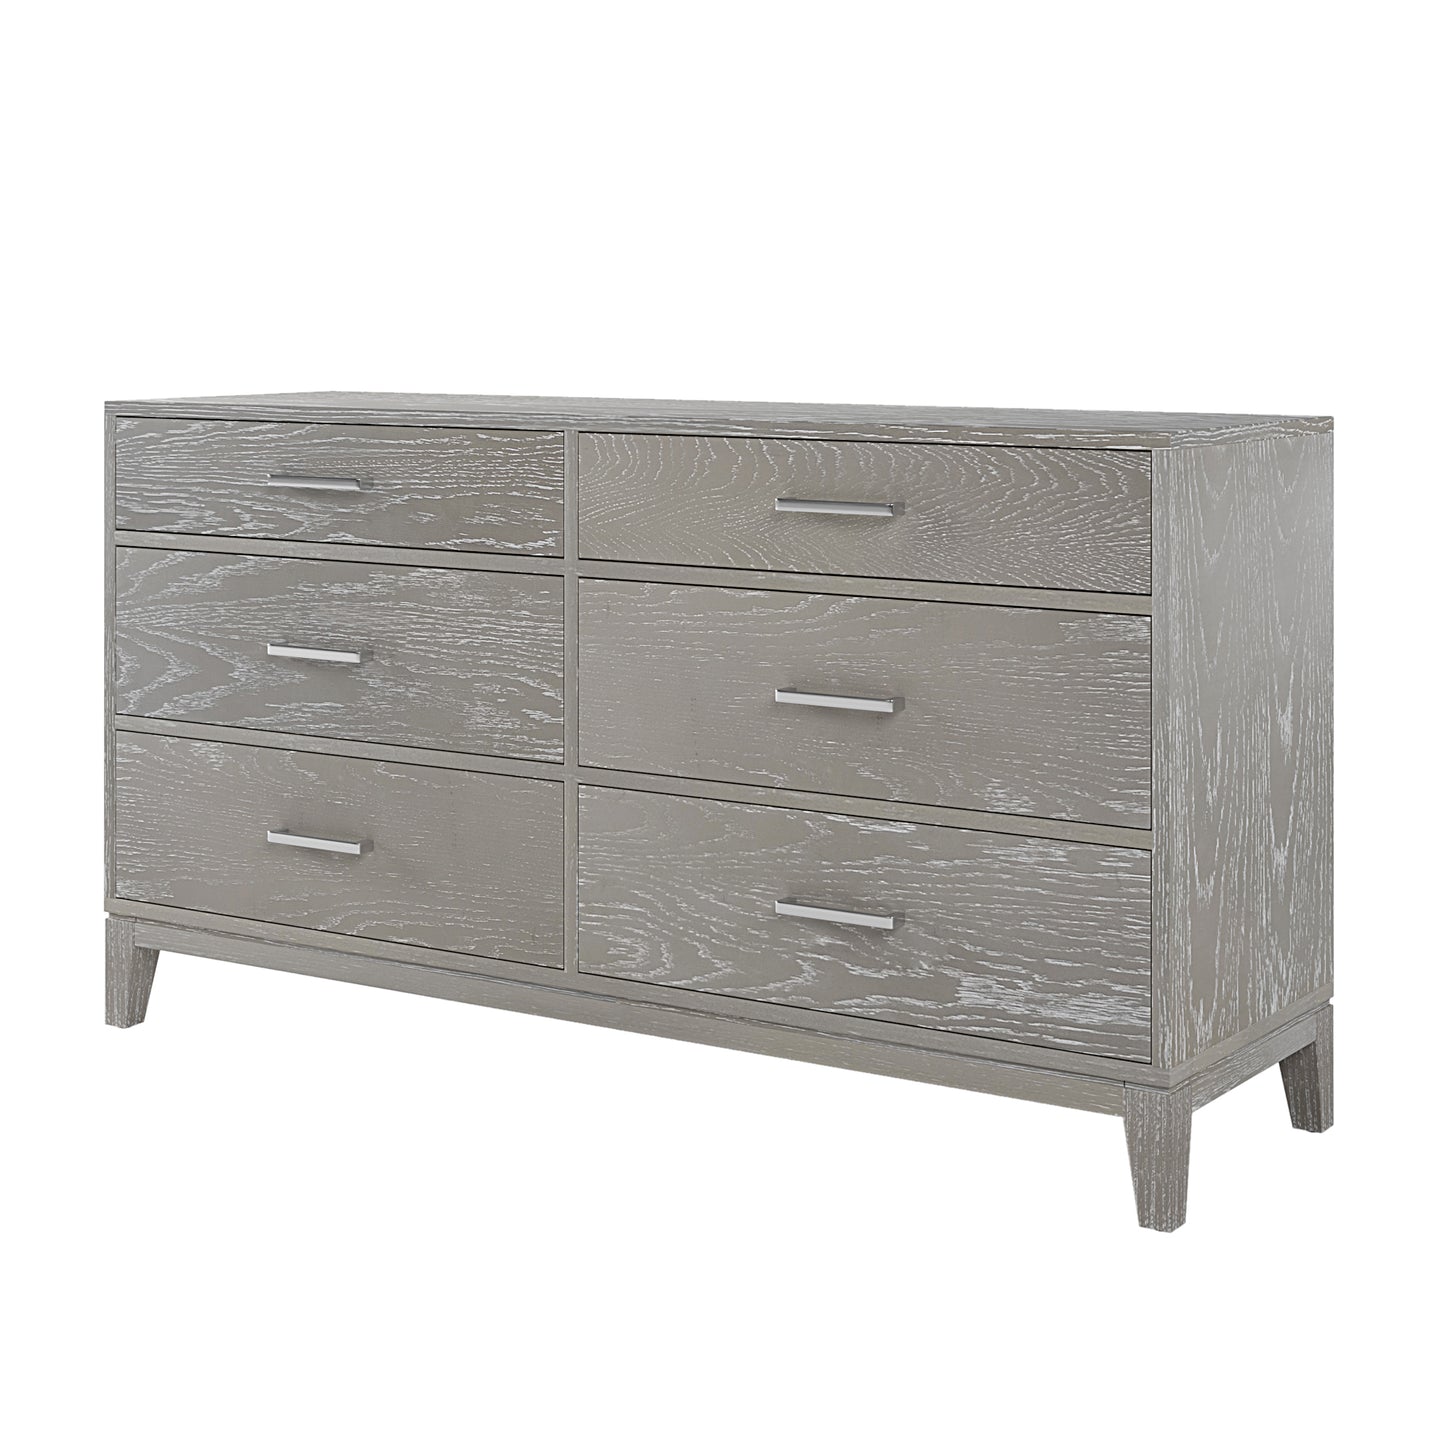 Modern Concise Style Gray Wood Grain Six-Drawer Dresser with Tapered Legs and Smooth Gliding Drawers